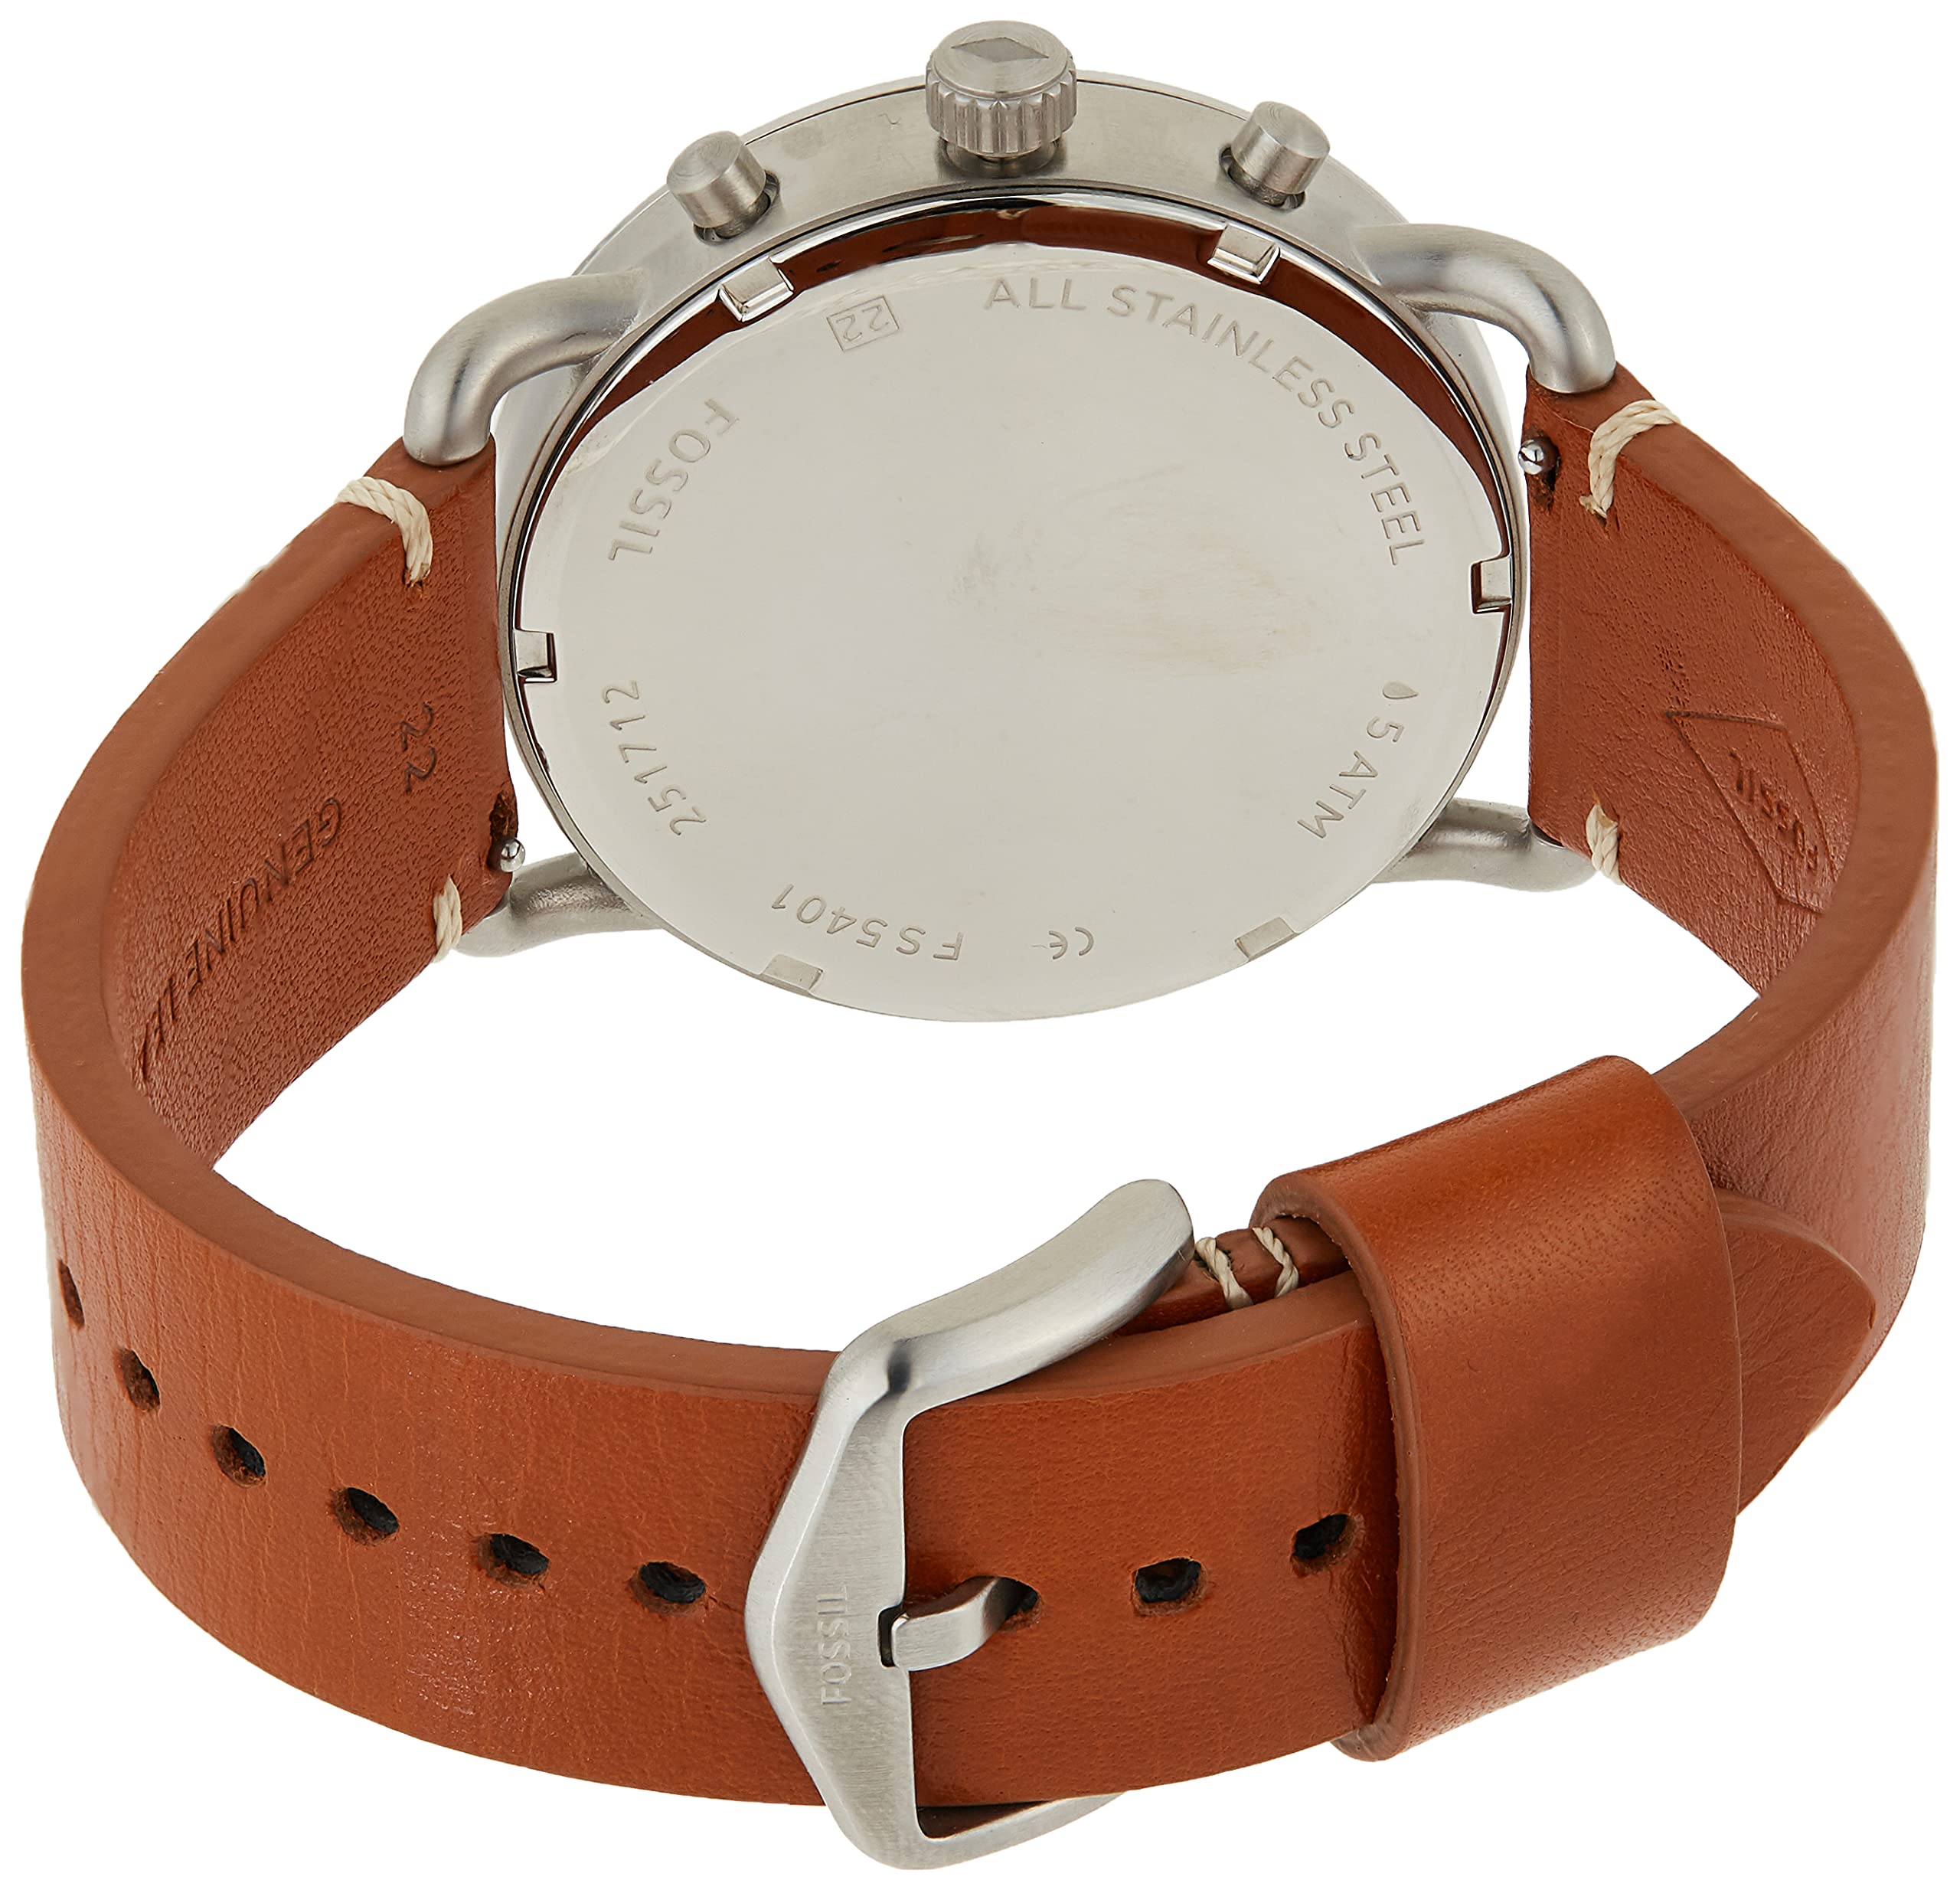 Fossil Men's Commuter Stainless Steel and Leather Casual Quartz Watch